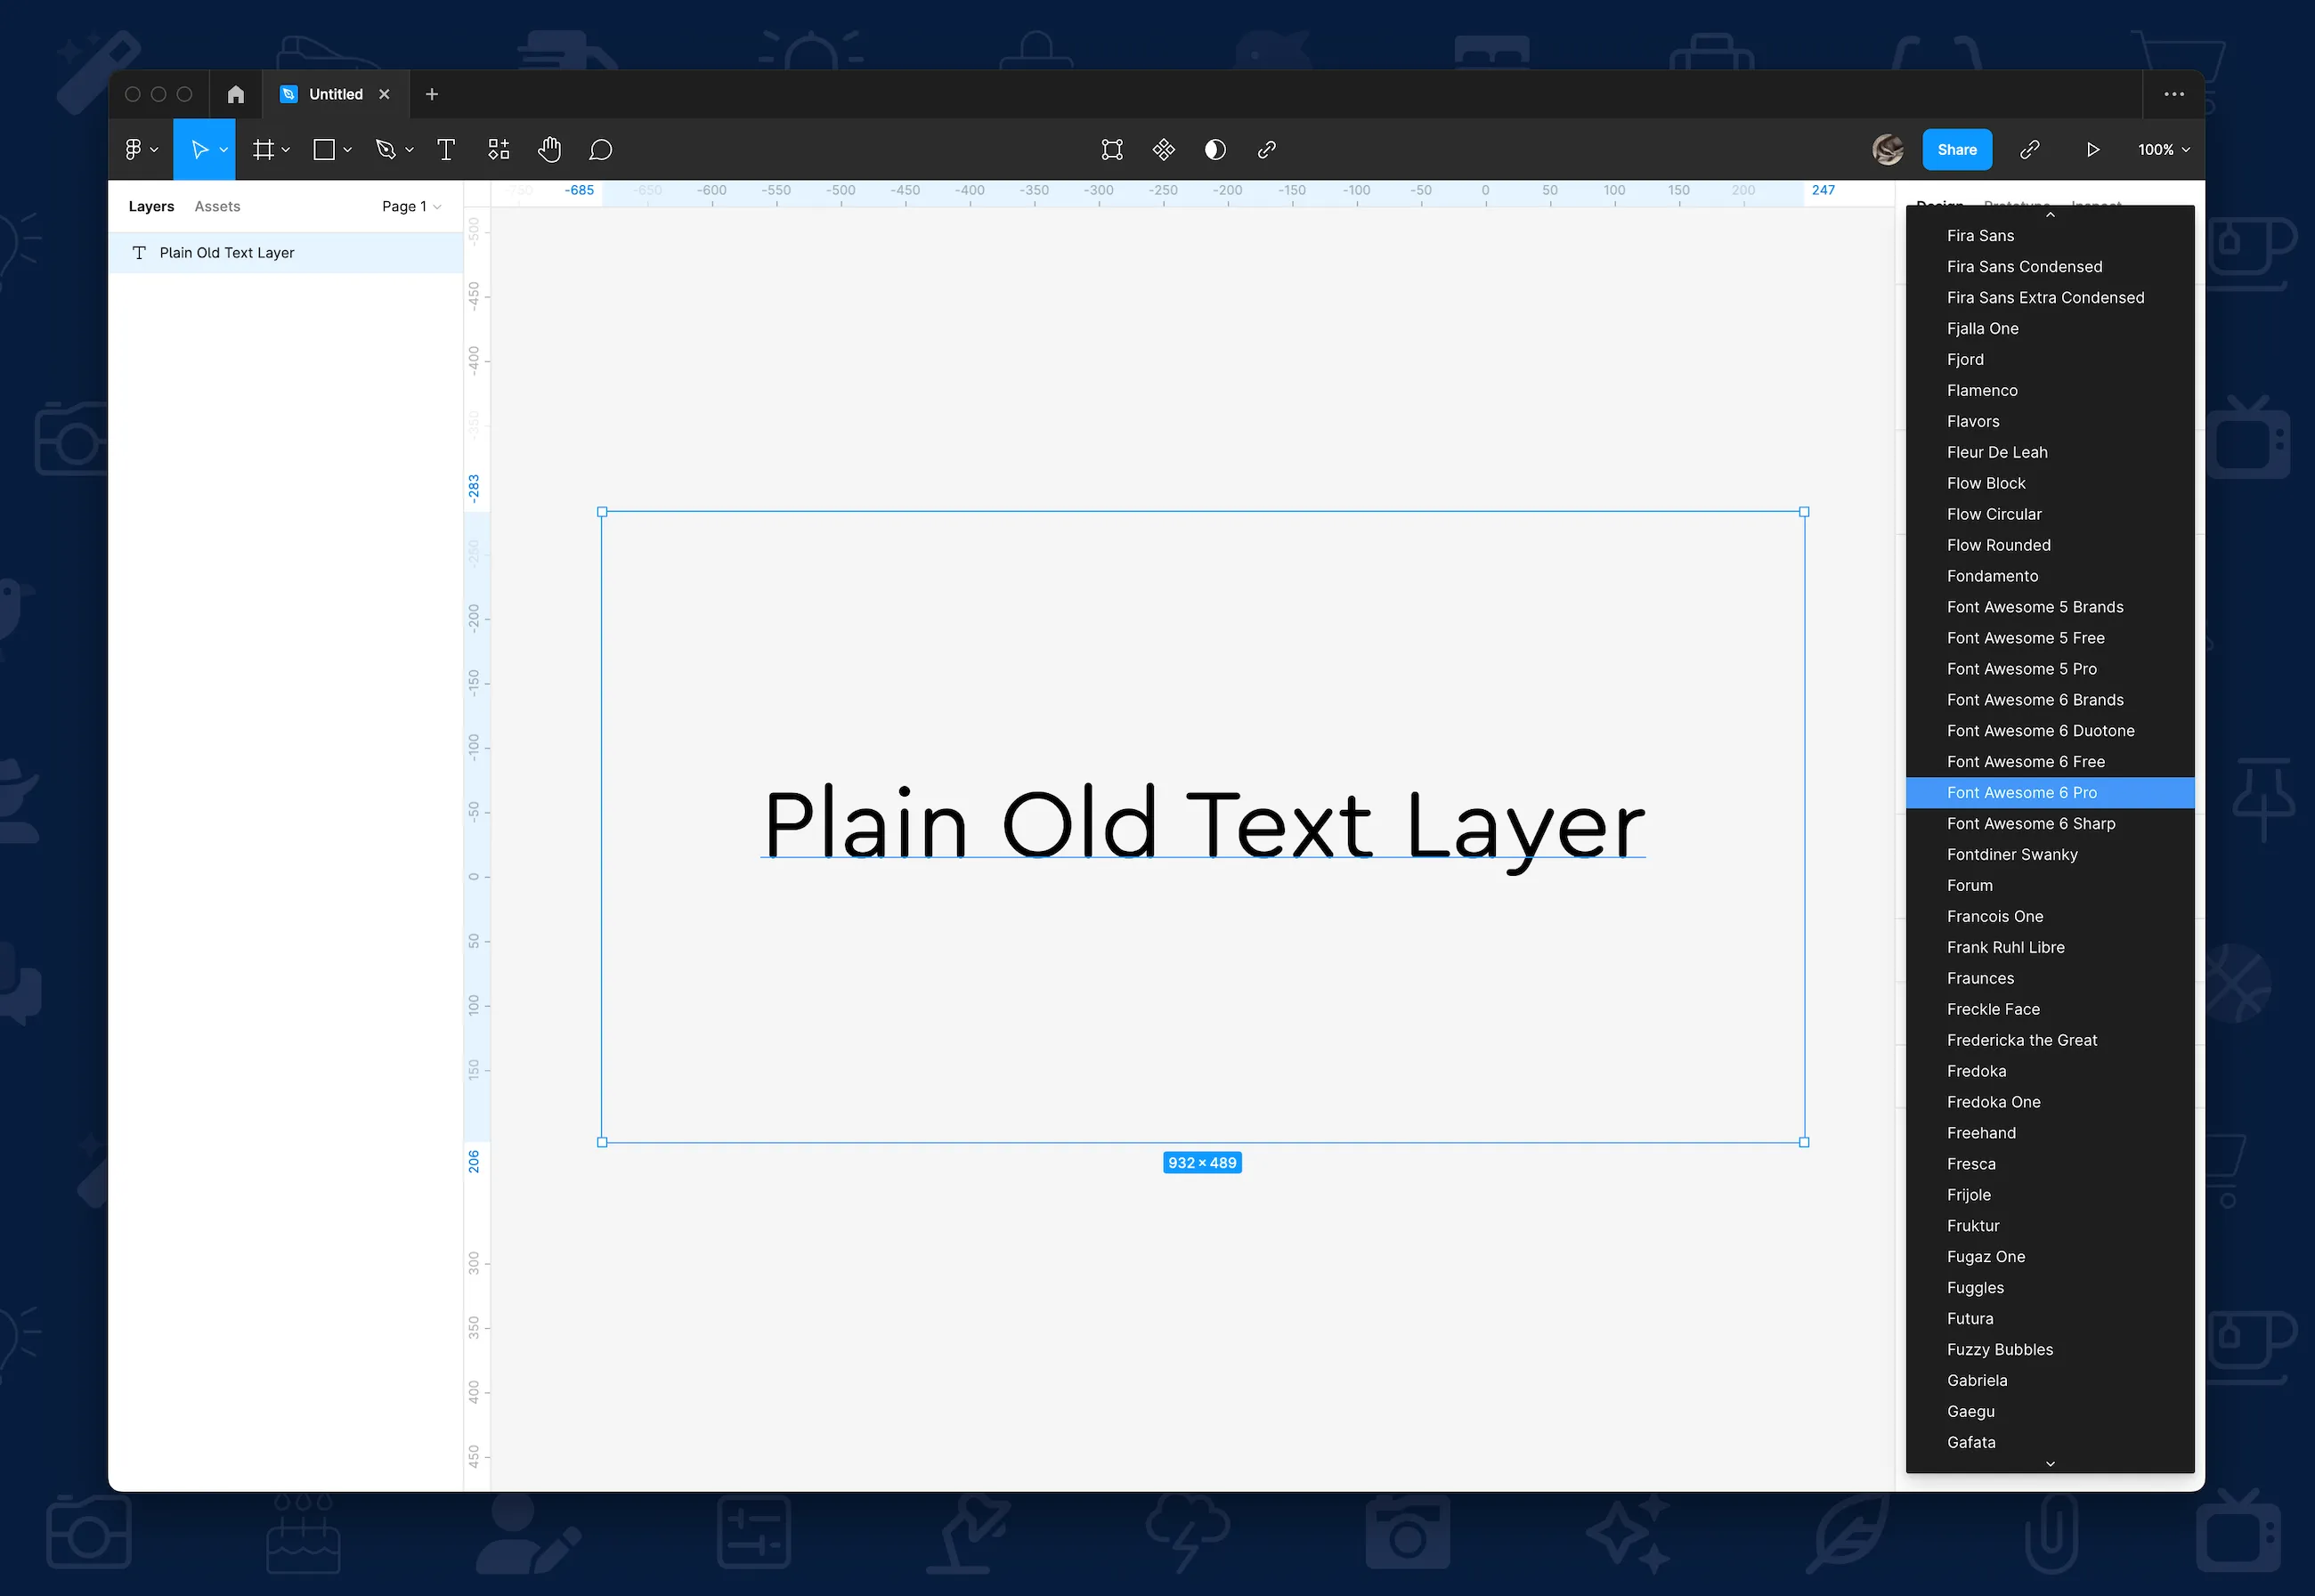 Selecting Font Awesome 6 Pro